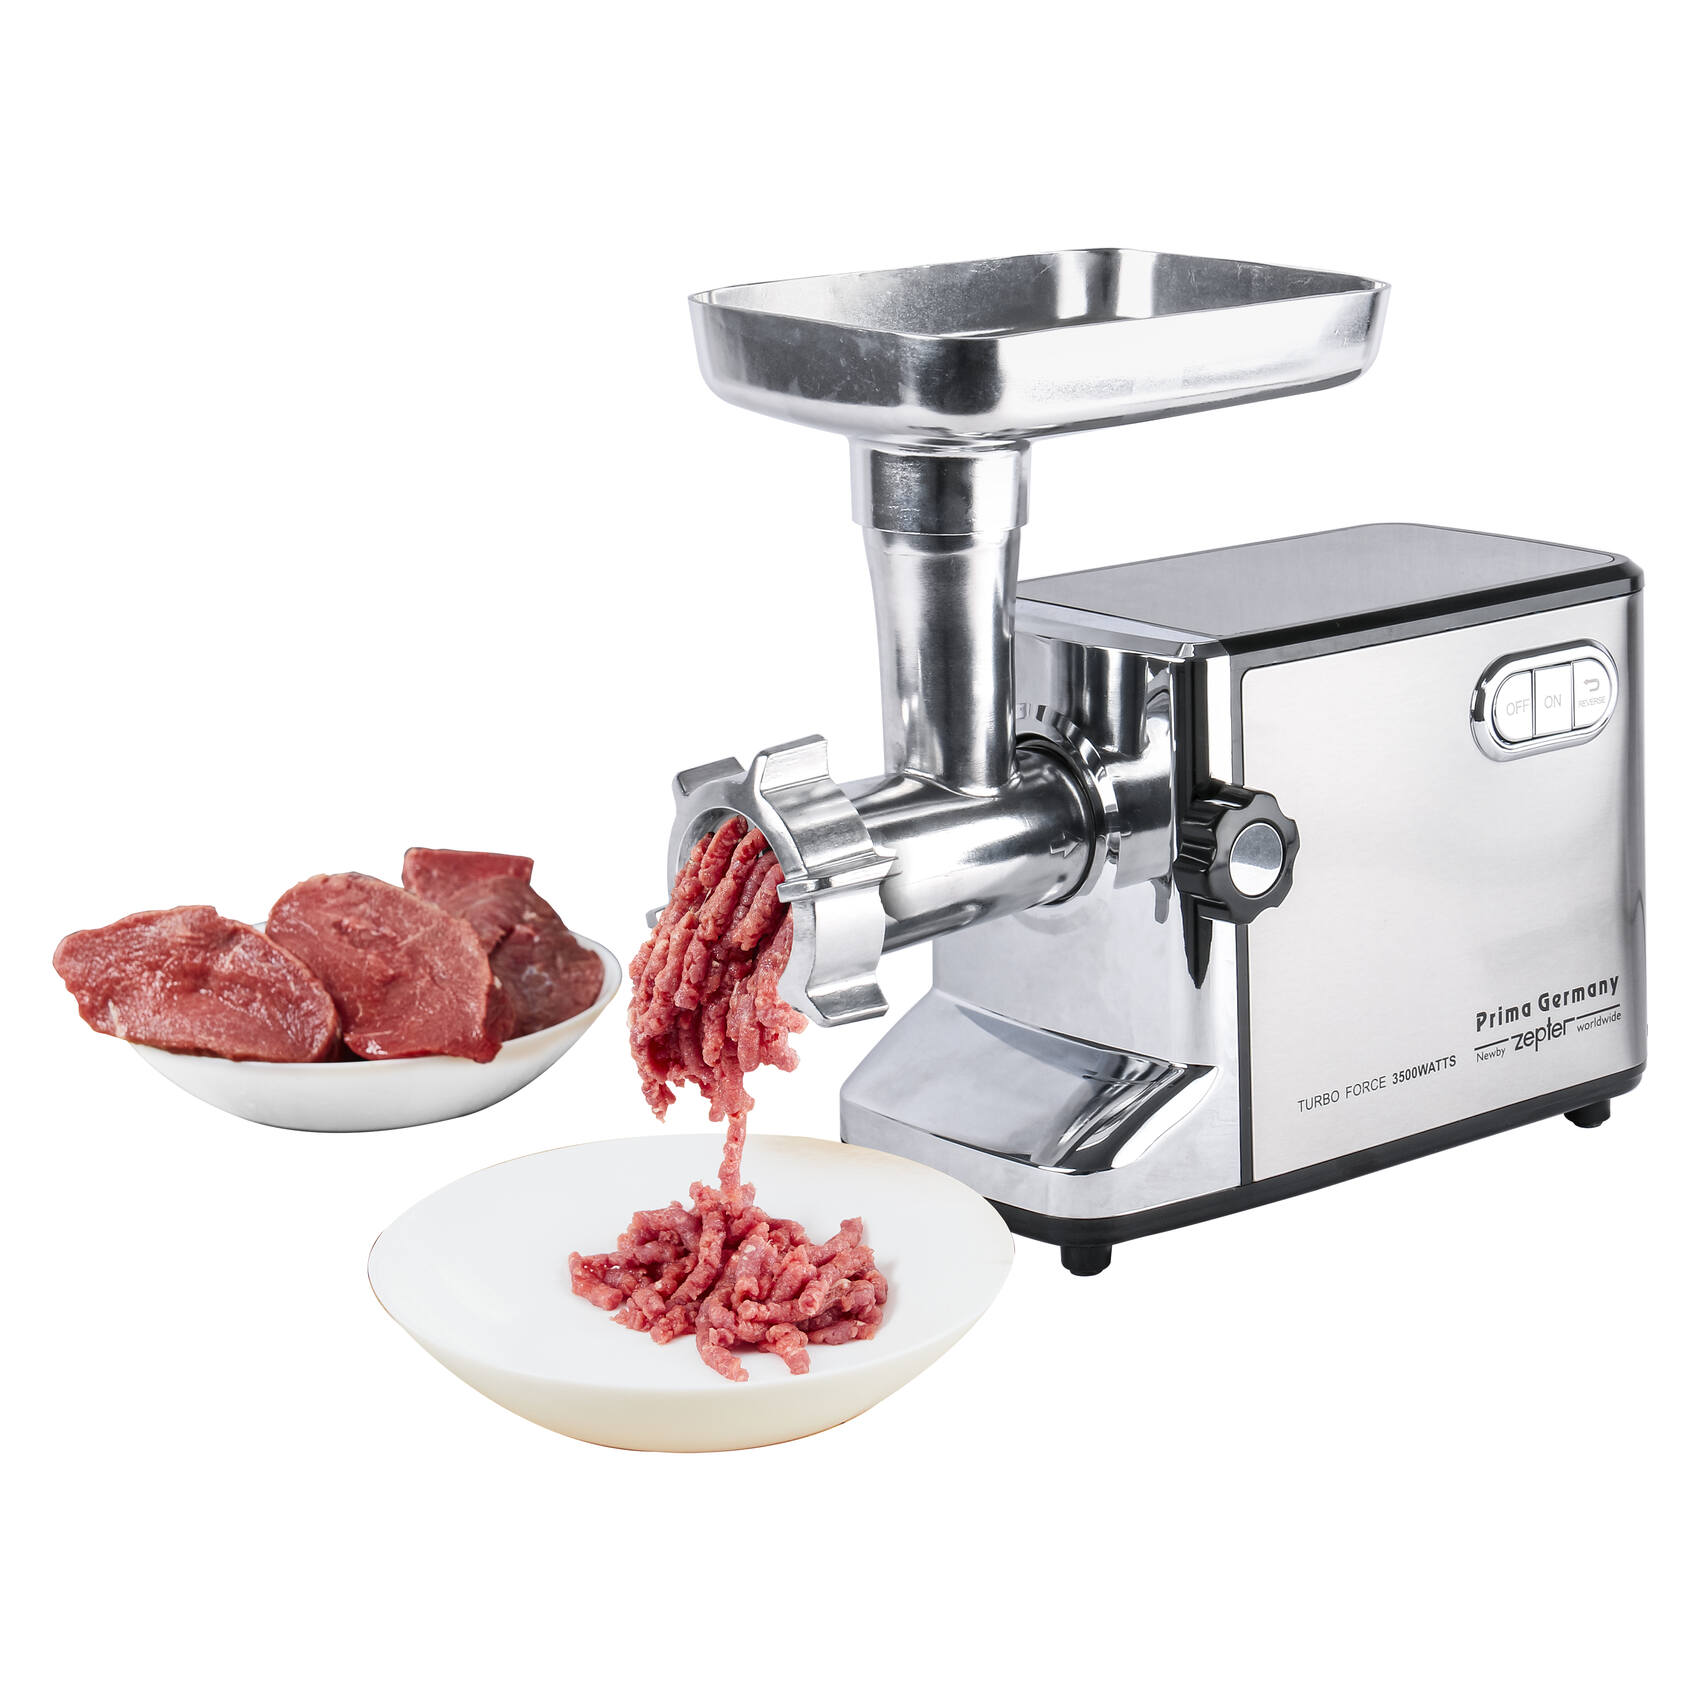 PRIMA MEAT GRINDER 3500W | HEAVY DUTY MOTOR | STAINLESS STEEL PANNEL | STAINLESS STEEL BODY | SAFTY CIRCUIT BREAKER TO PREVENT MOTOR BURN OUT | STAINLESSSTEEL CUTTING BLADE MG-2